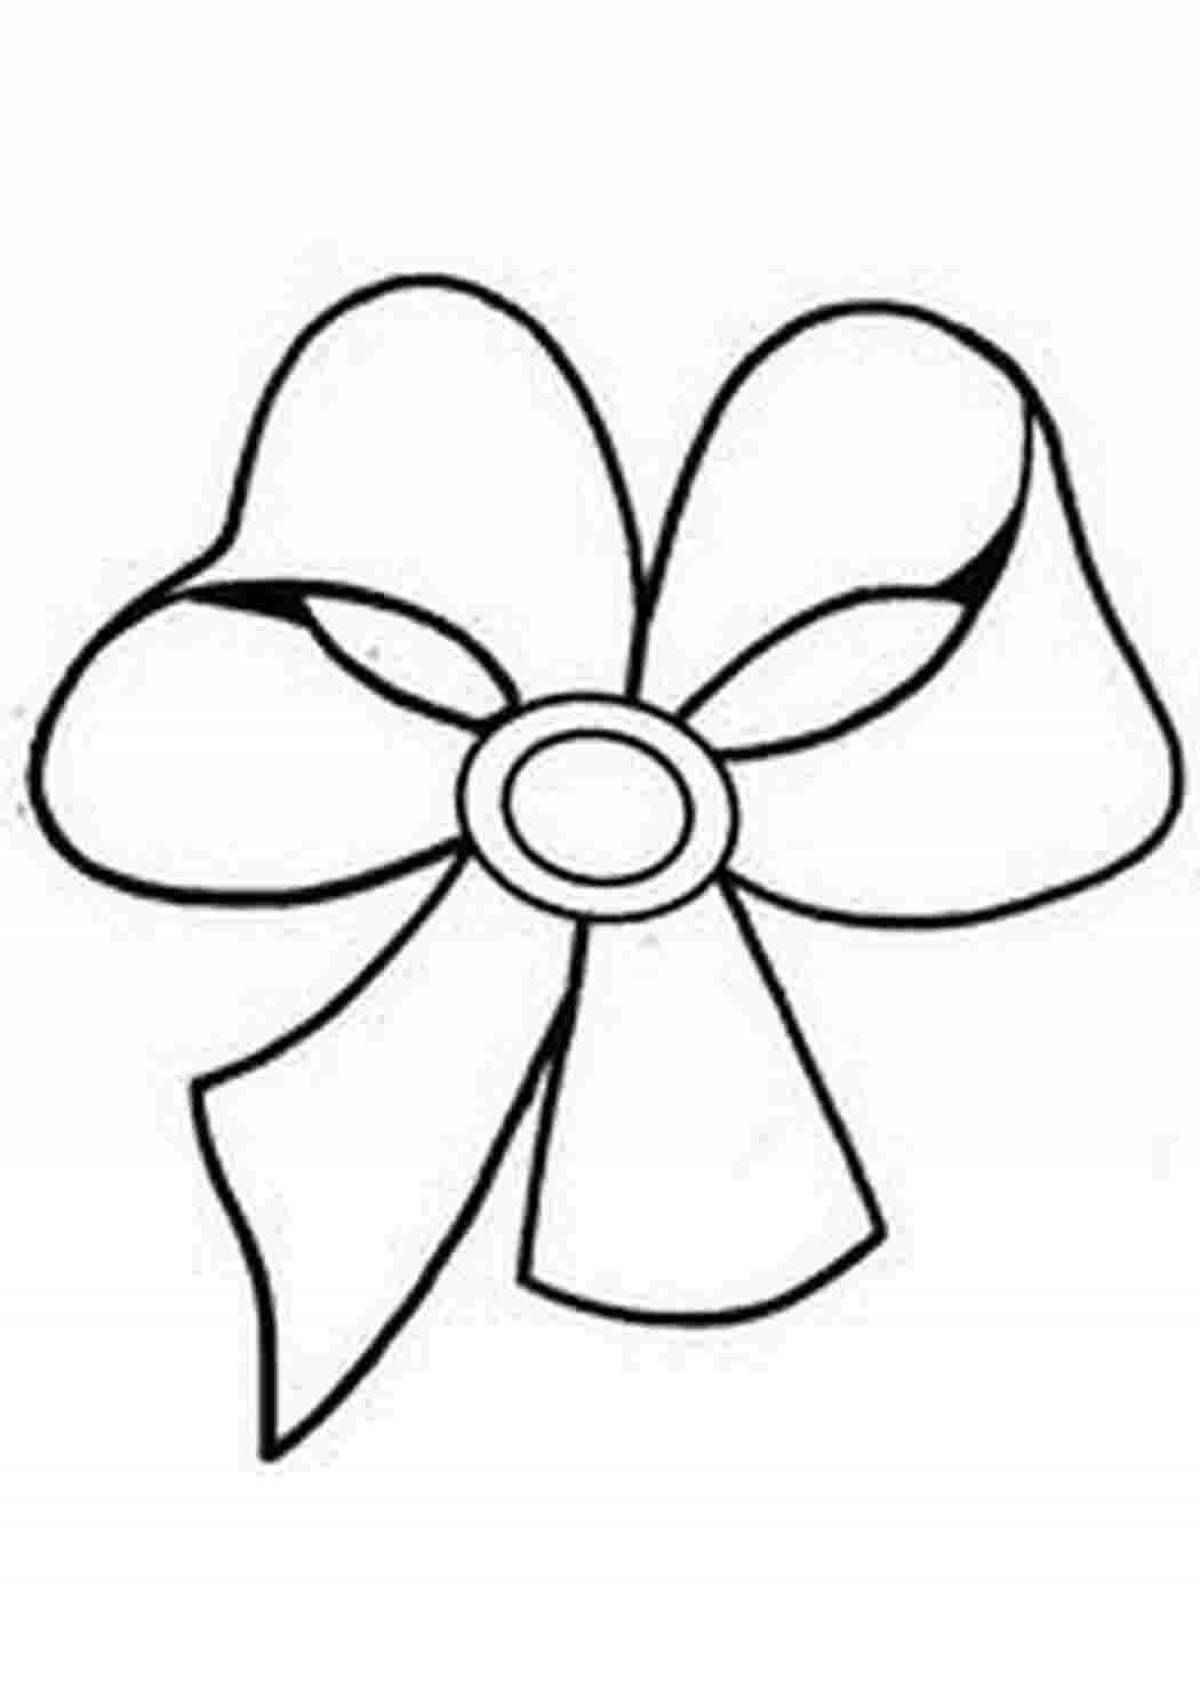 Amazing coloring pages with bows for kids